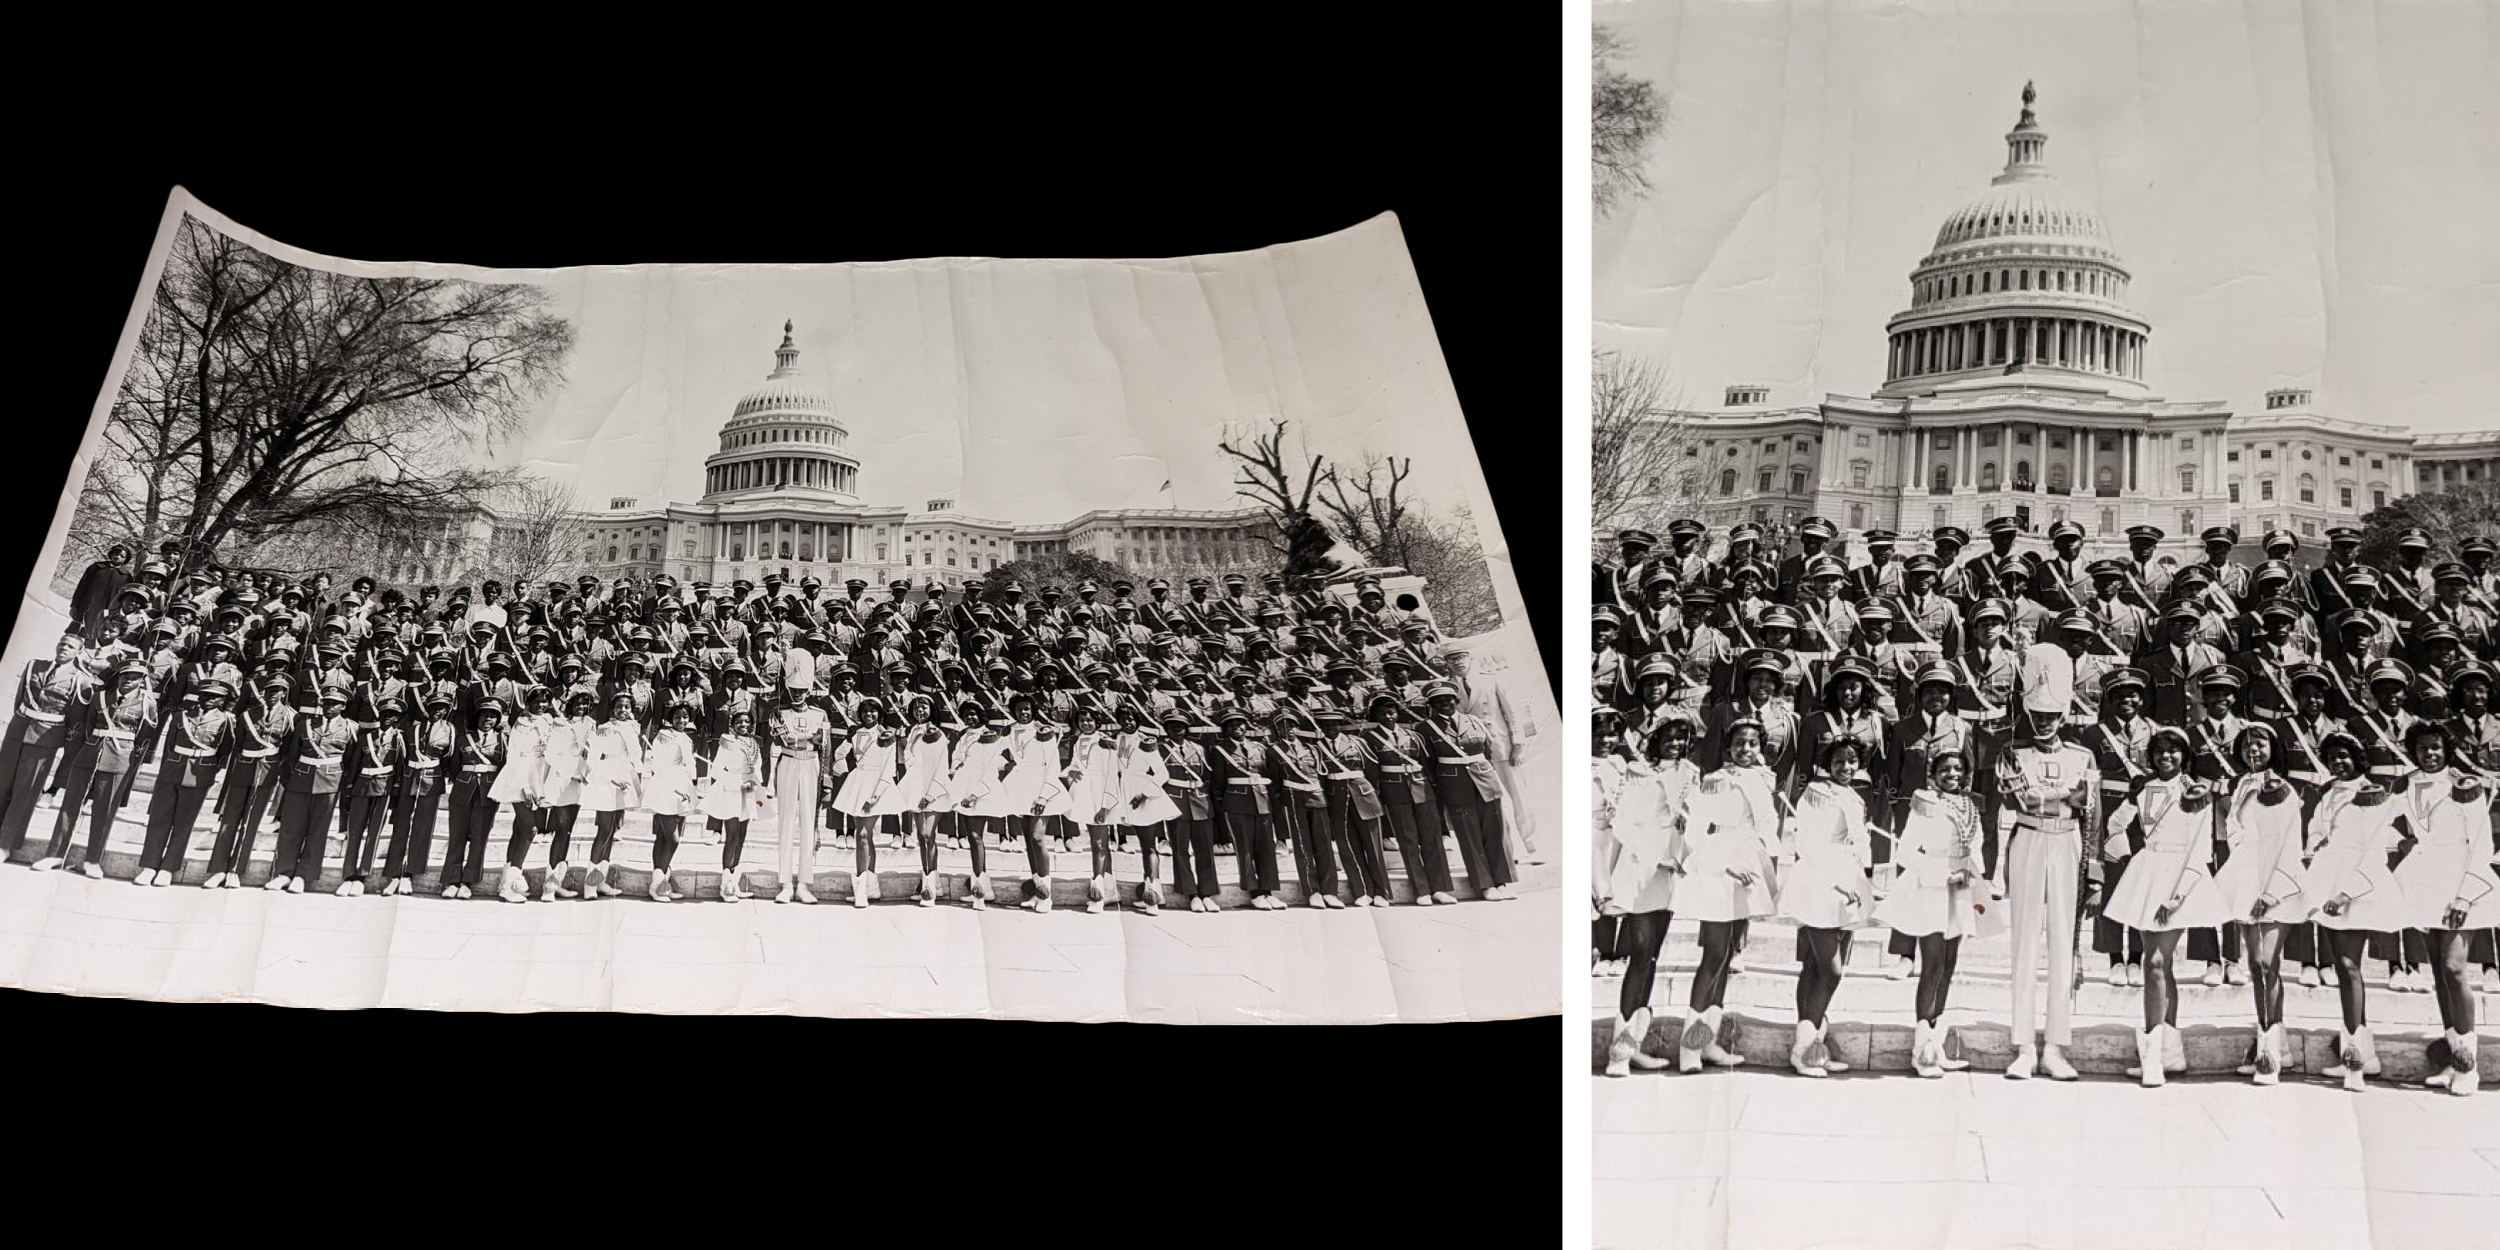 photo of a black and white archival print showing a large band standing for a group portrait in front of the capital building.